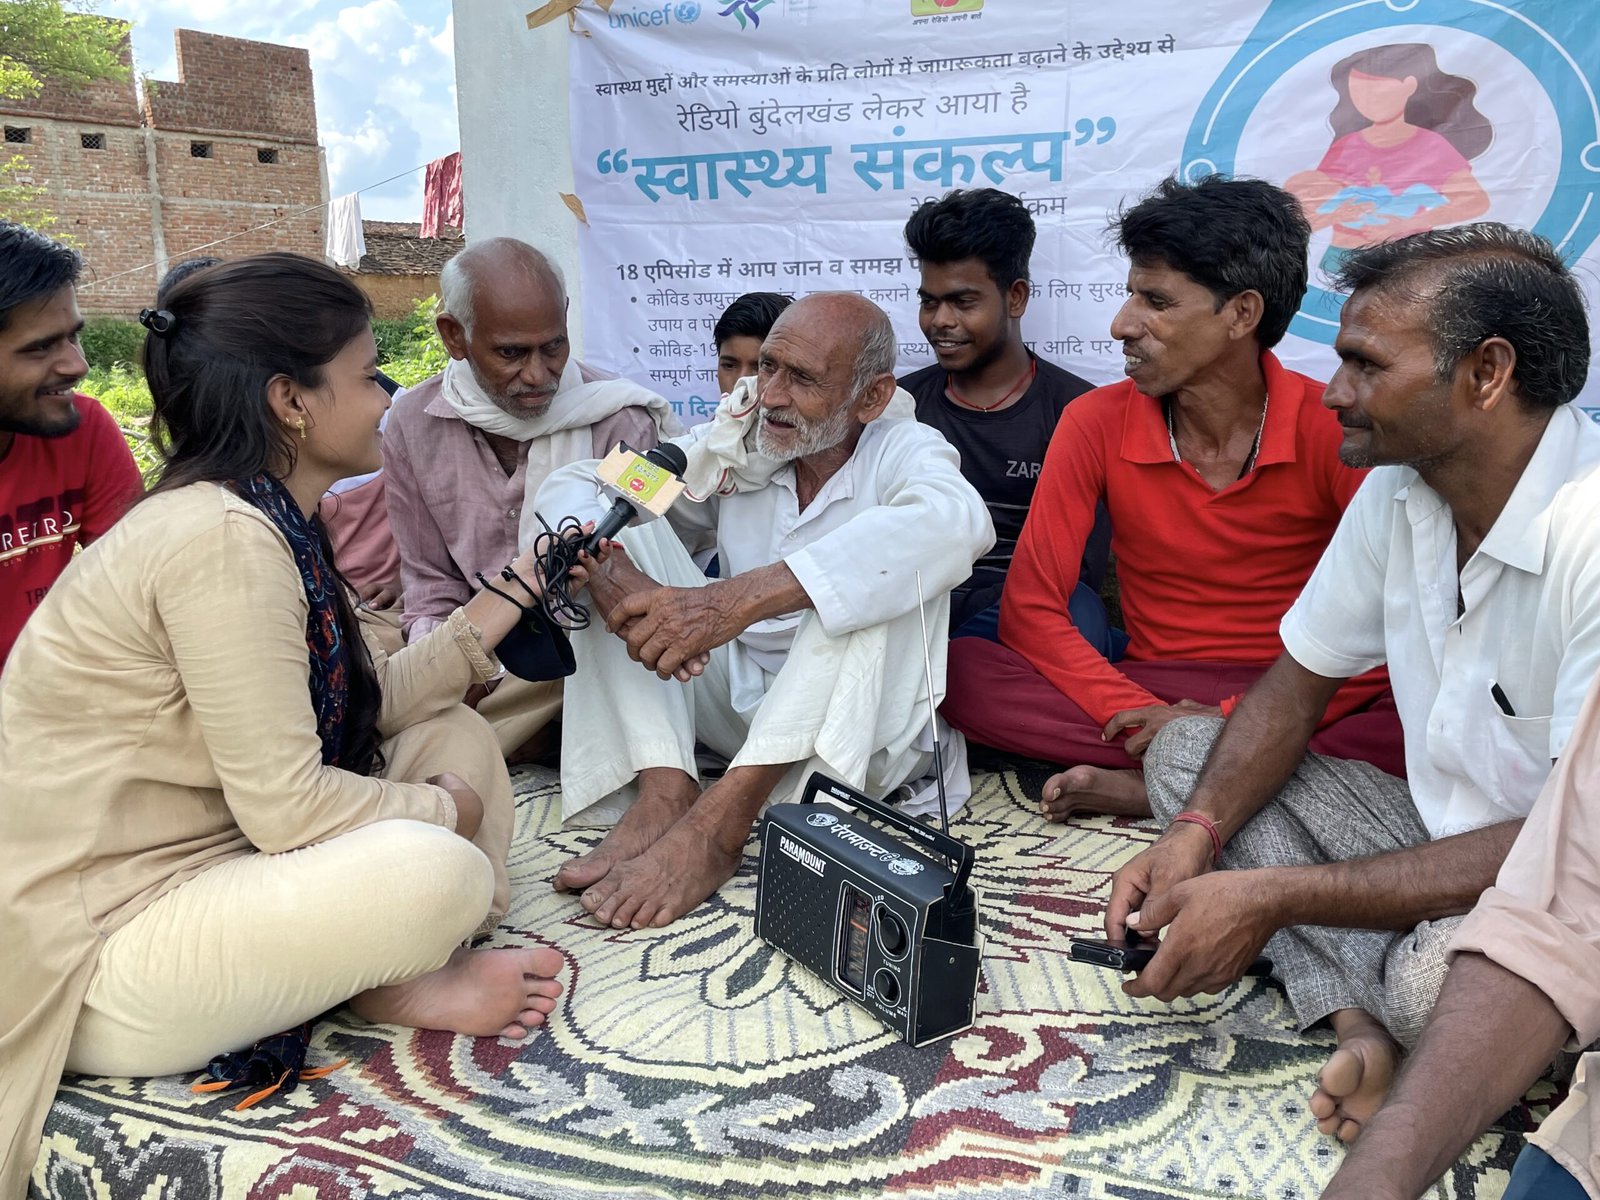 A young reporter talks to the men in the community during a public health camp conducted by Bundelkhand Radio. They are sitting together outdoors on a rug.